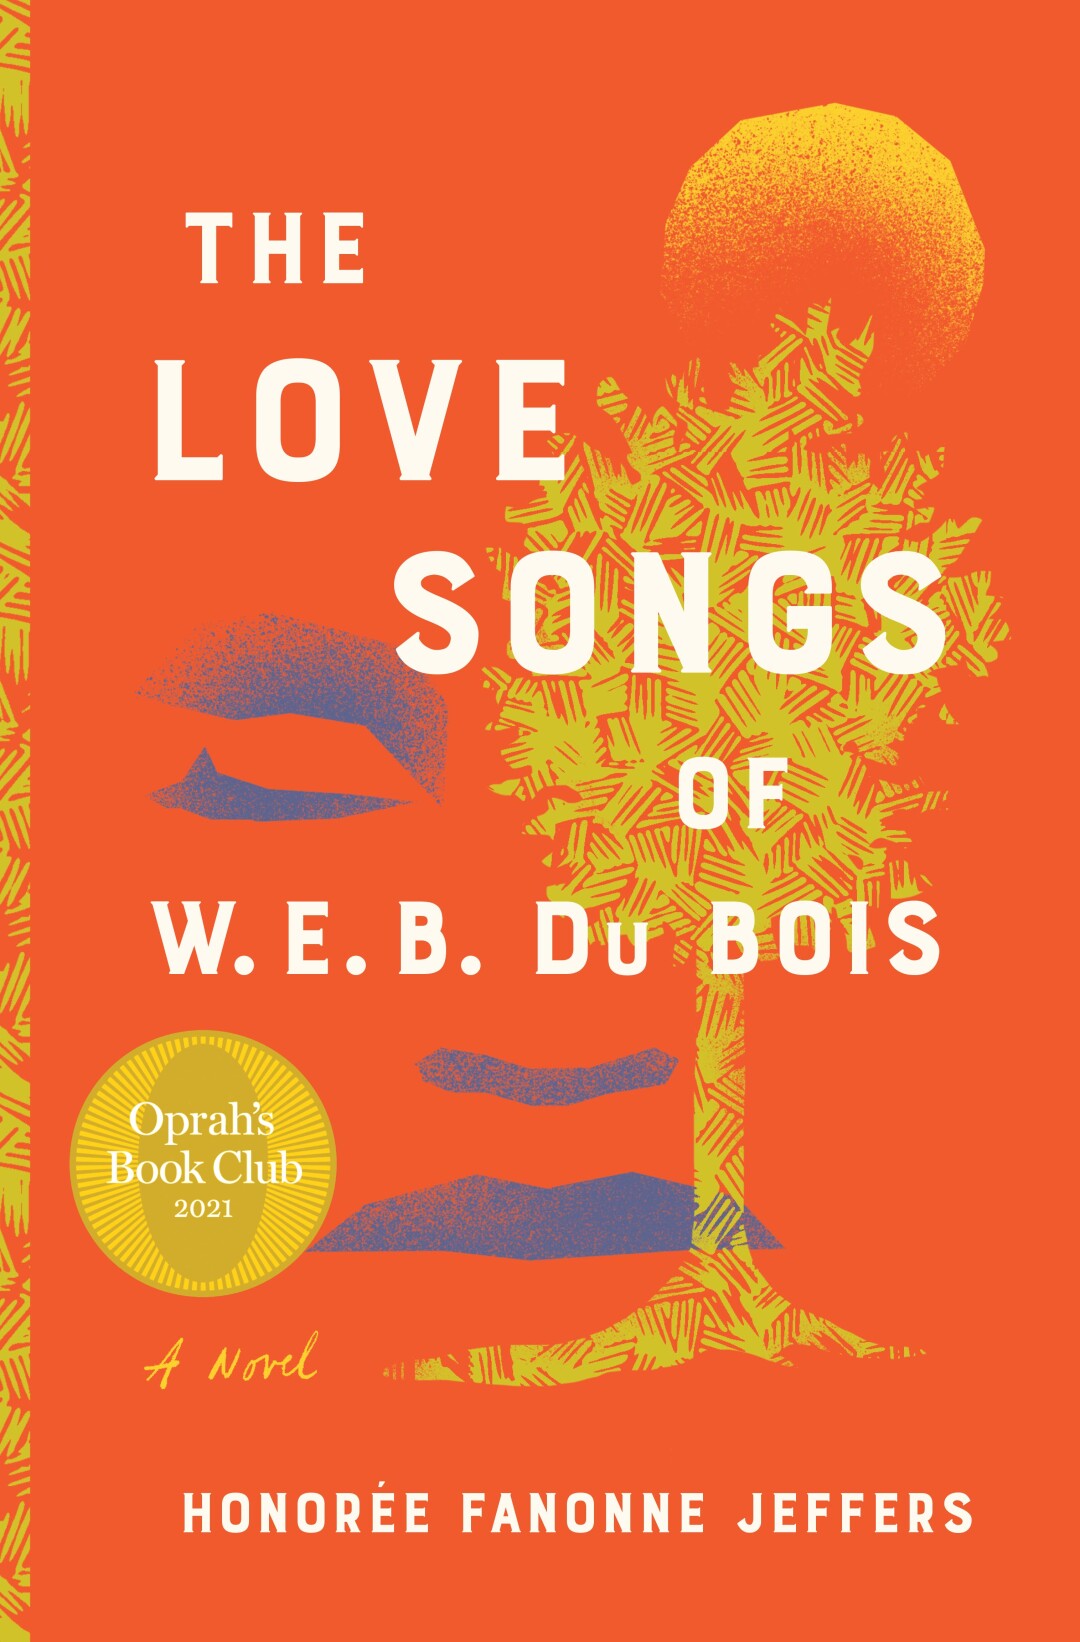 An image of a face and a tree on the cover of "WEB Du Bois Love Songs," by Honorée Fanonne Jeffers